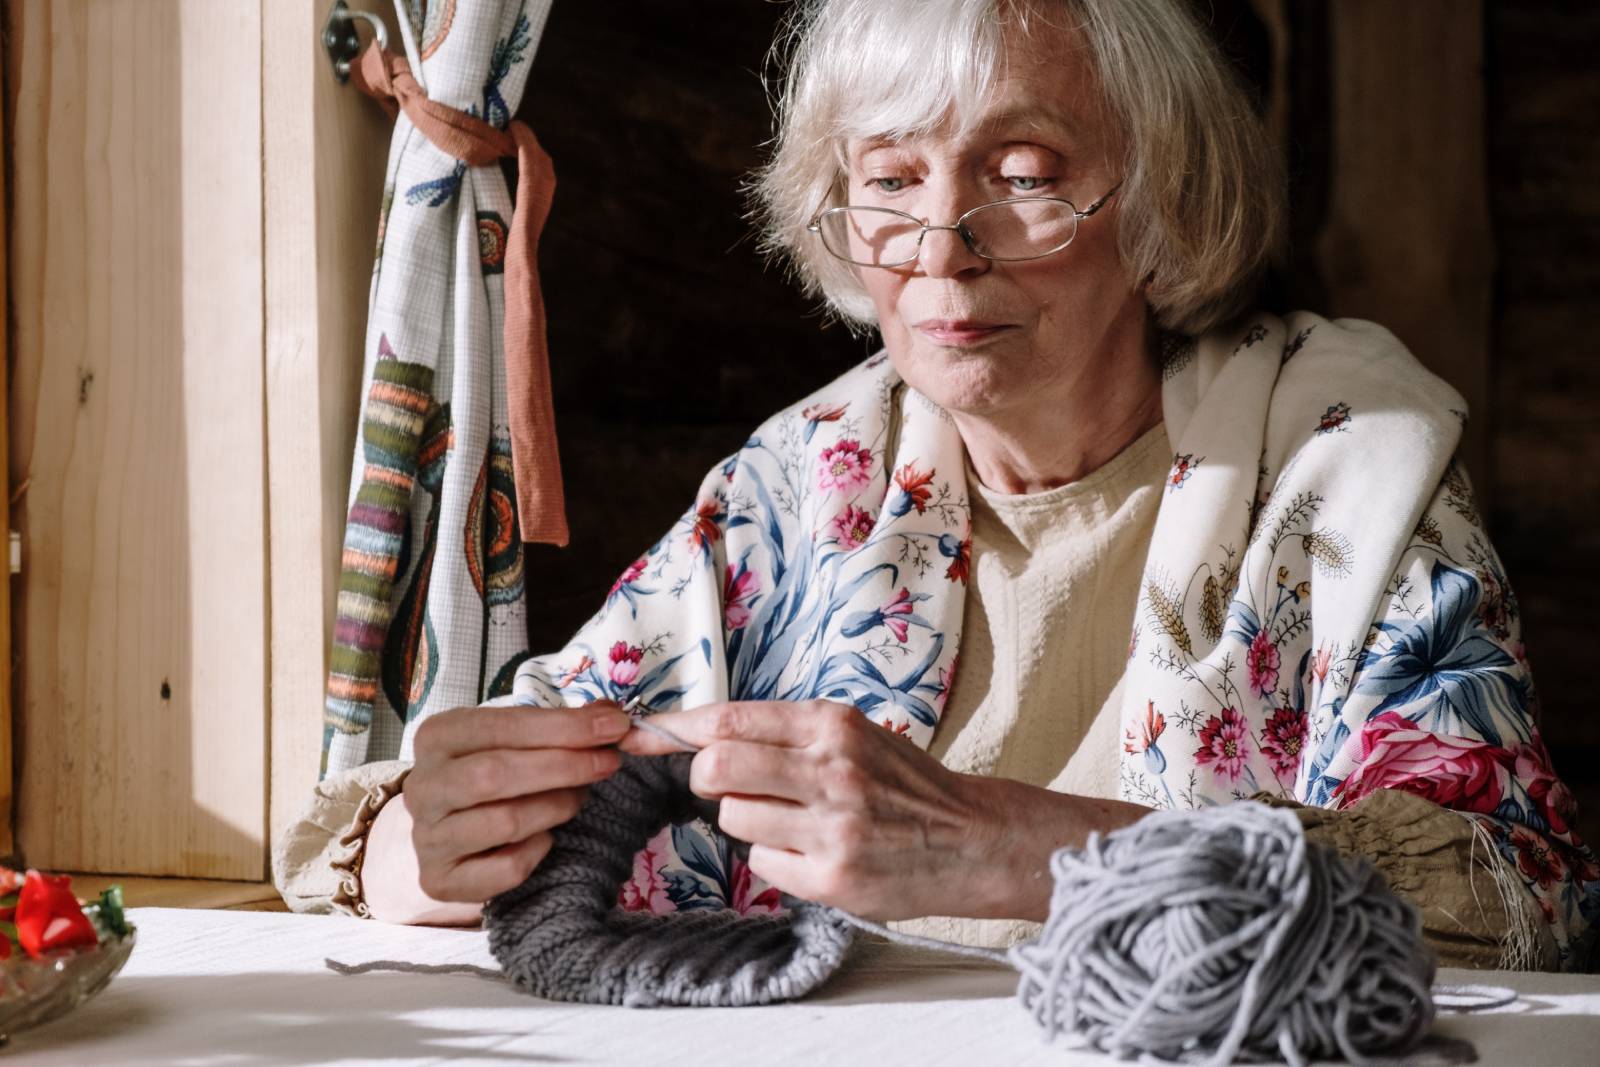 Elderly woman with dementia taking up a hobby in knitting.